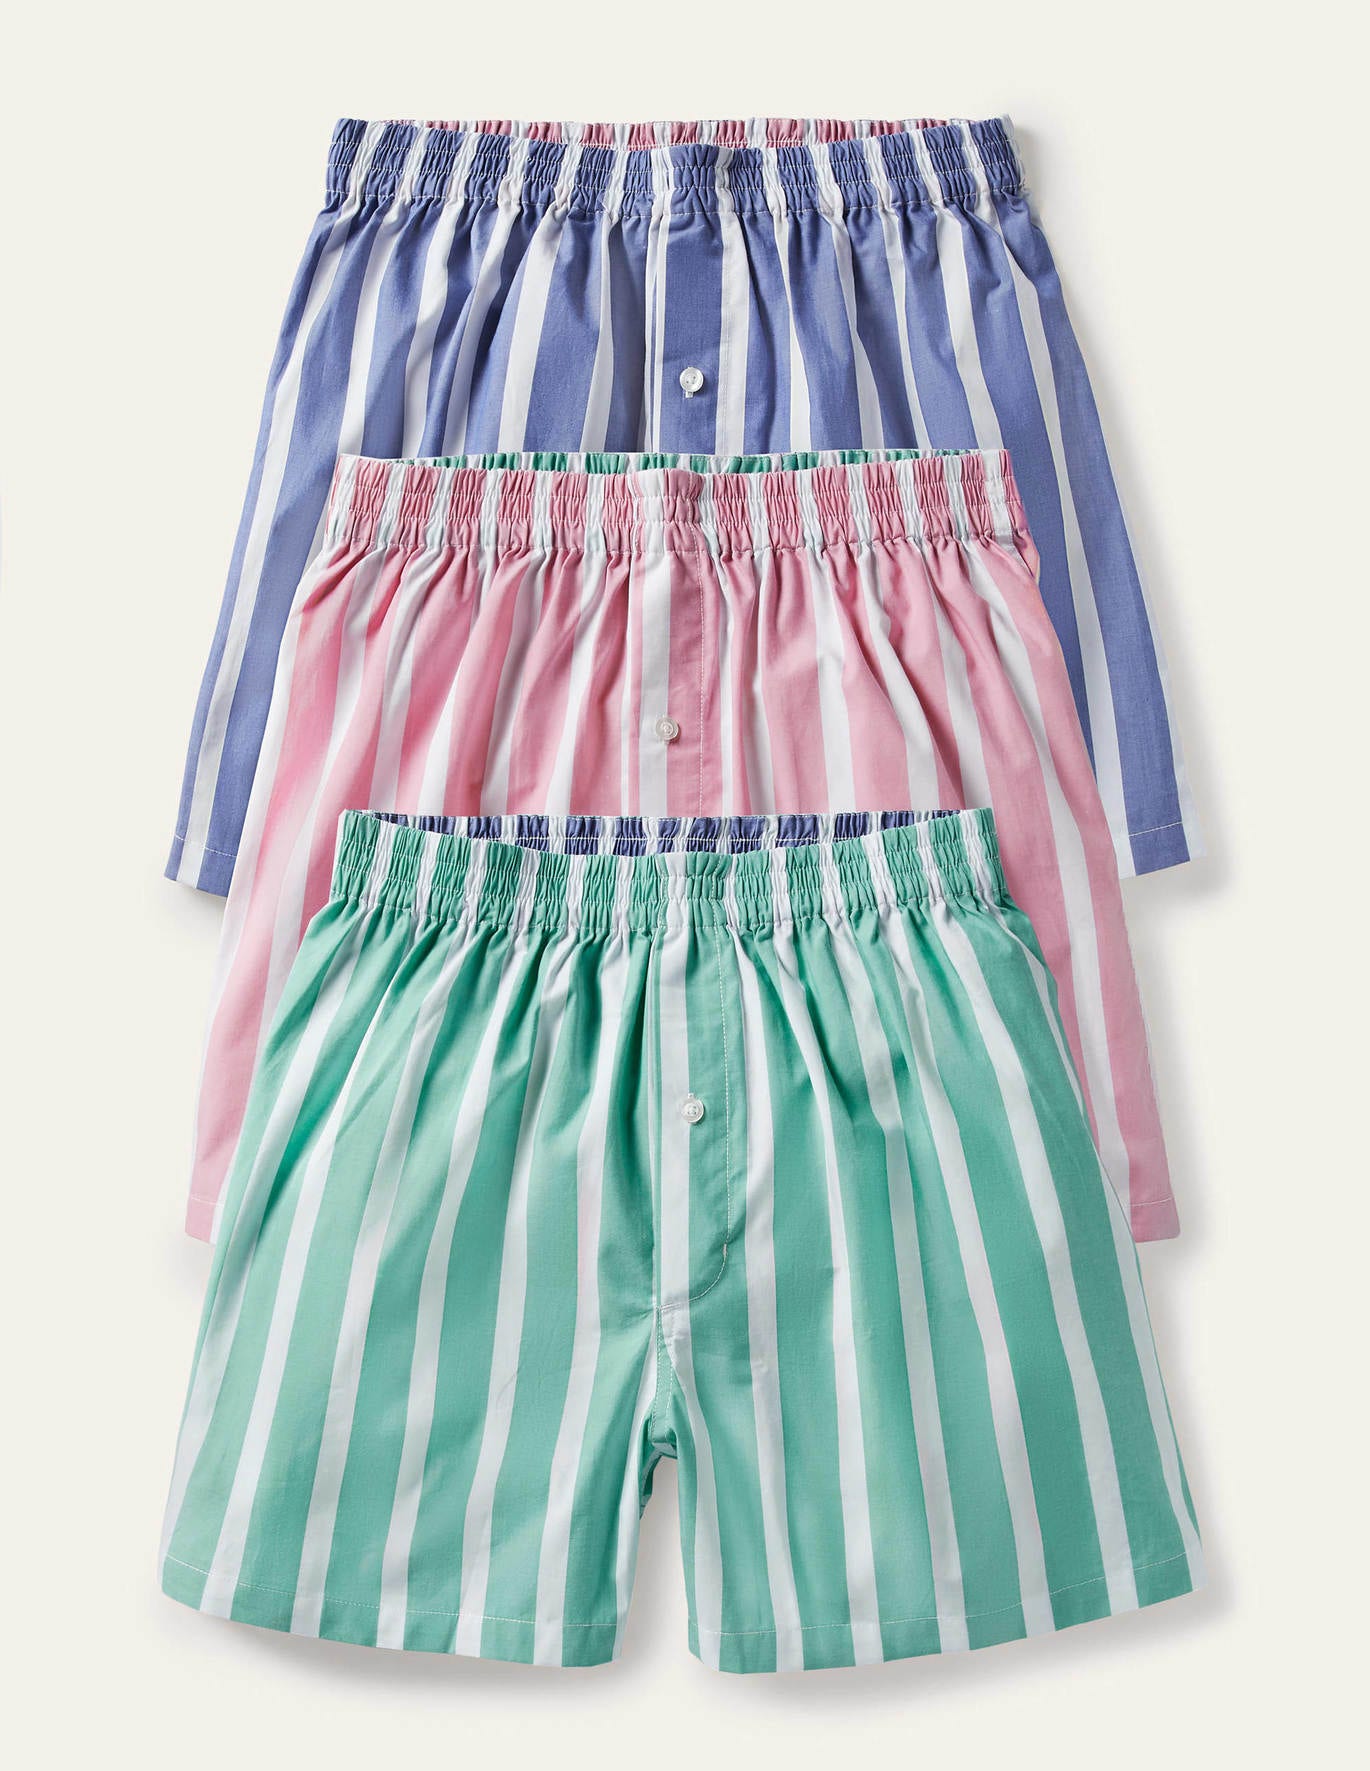 Boden 3 Pack Woven Boxers - Stripe Mix Pack